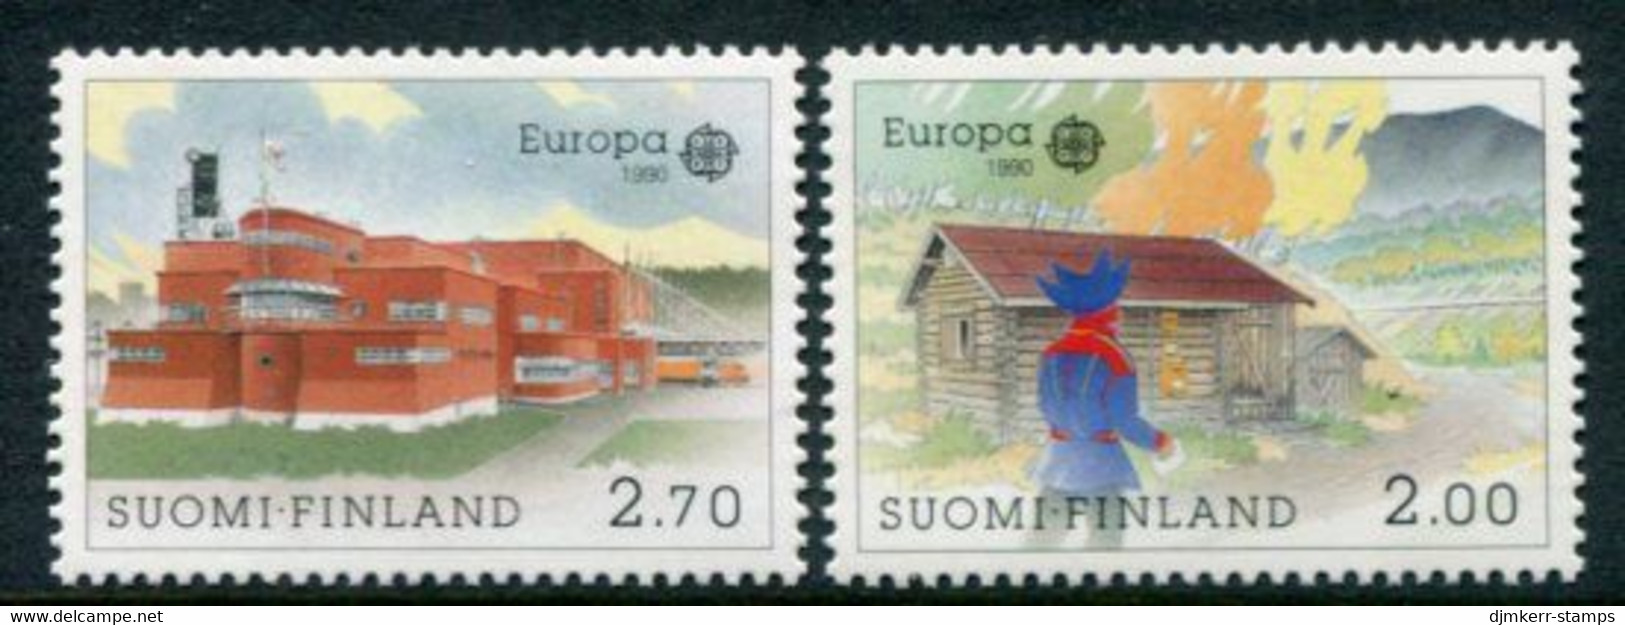 FINLAND 1990 Europa: Postal Buildings MNH / **.  Michel 1108-09 - Unused Stamps